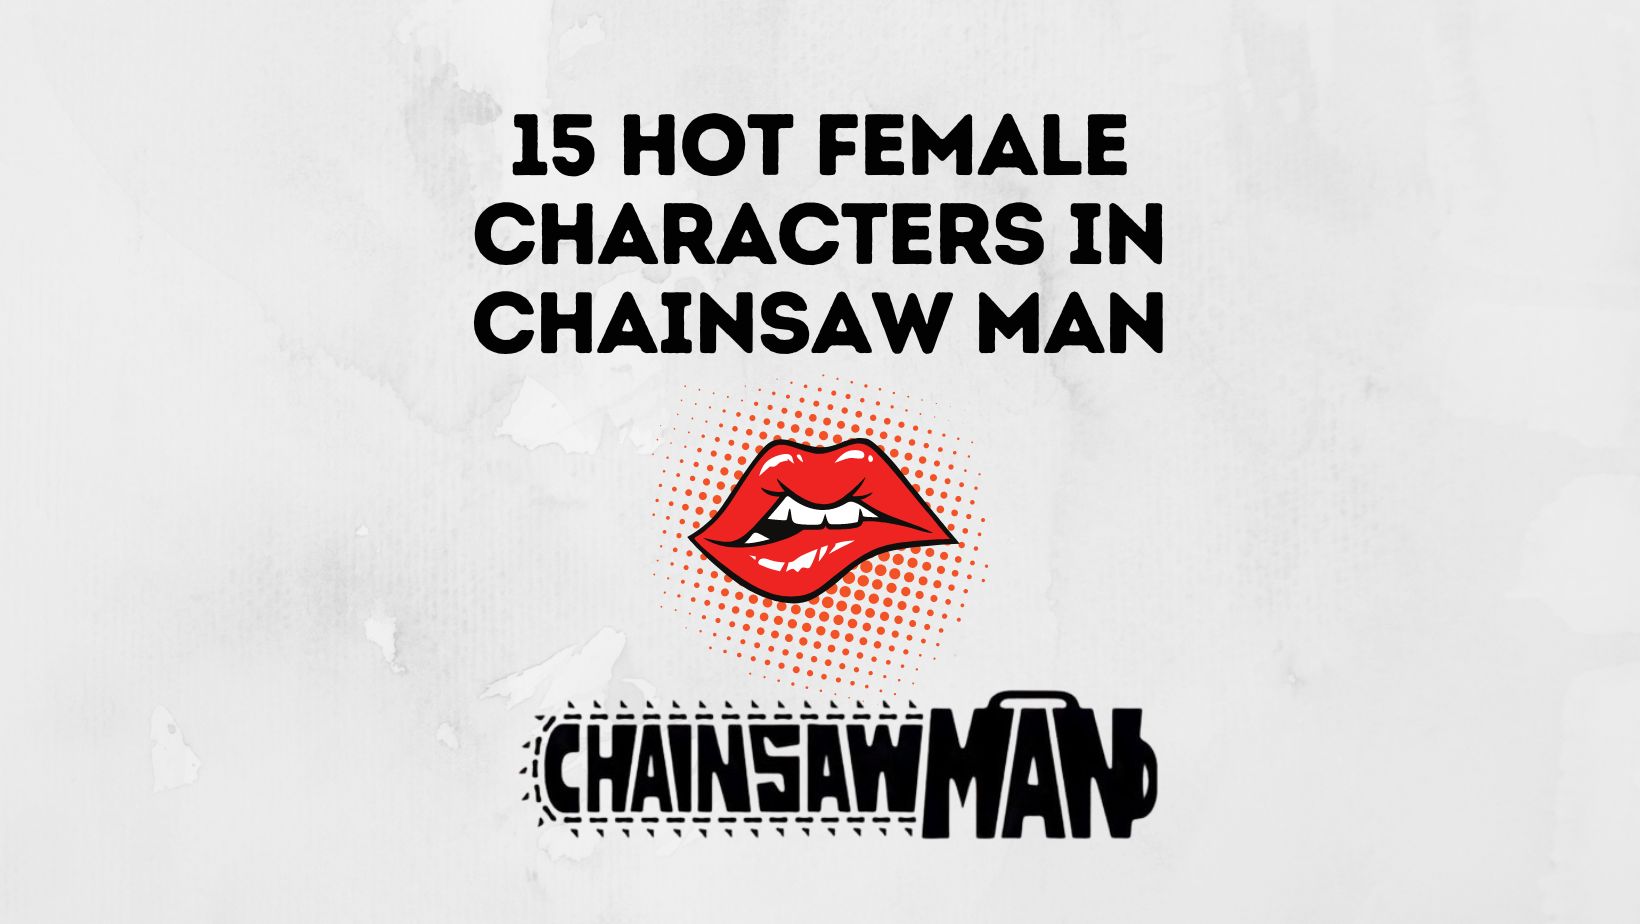 Hot Female Characters In Chainsaw Man